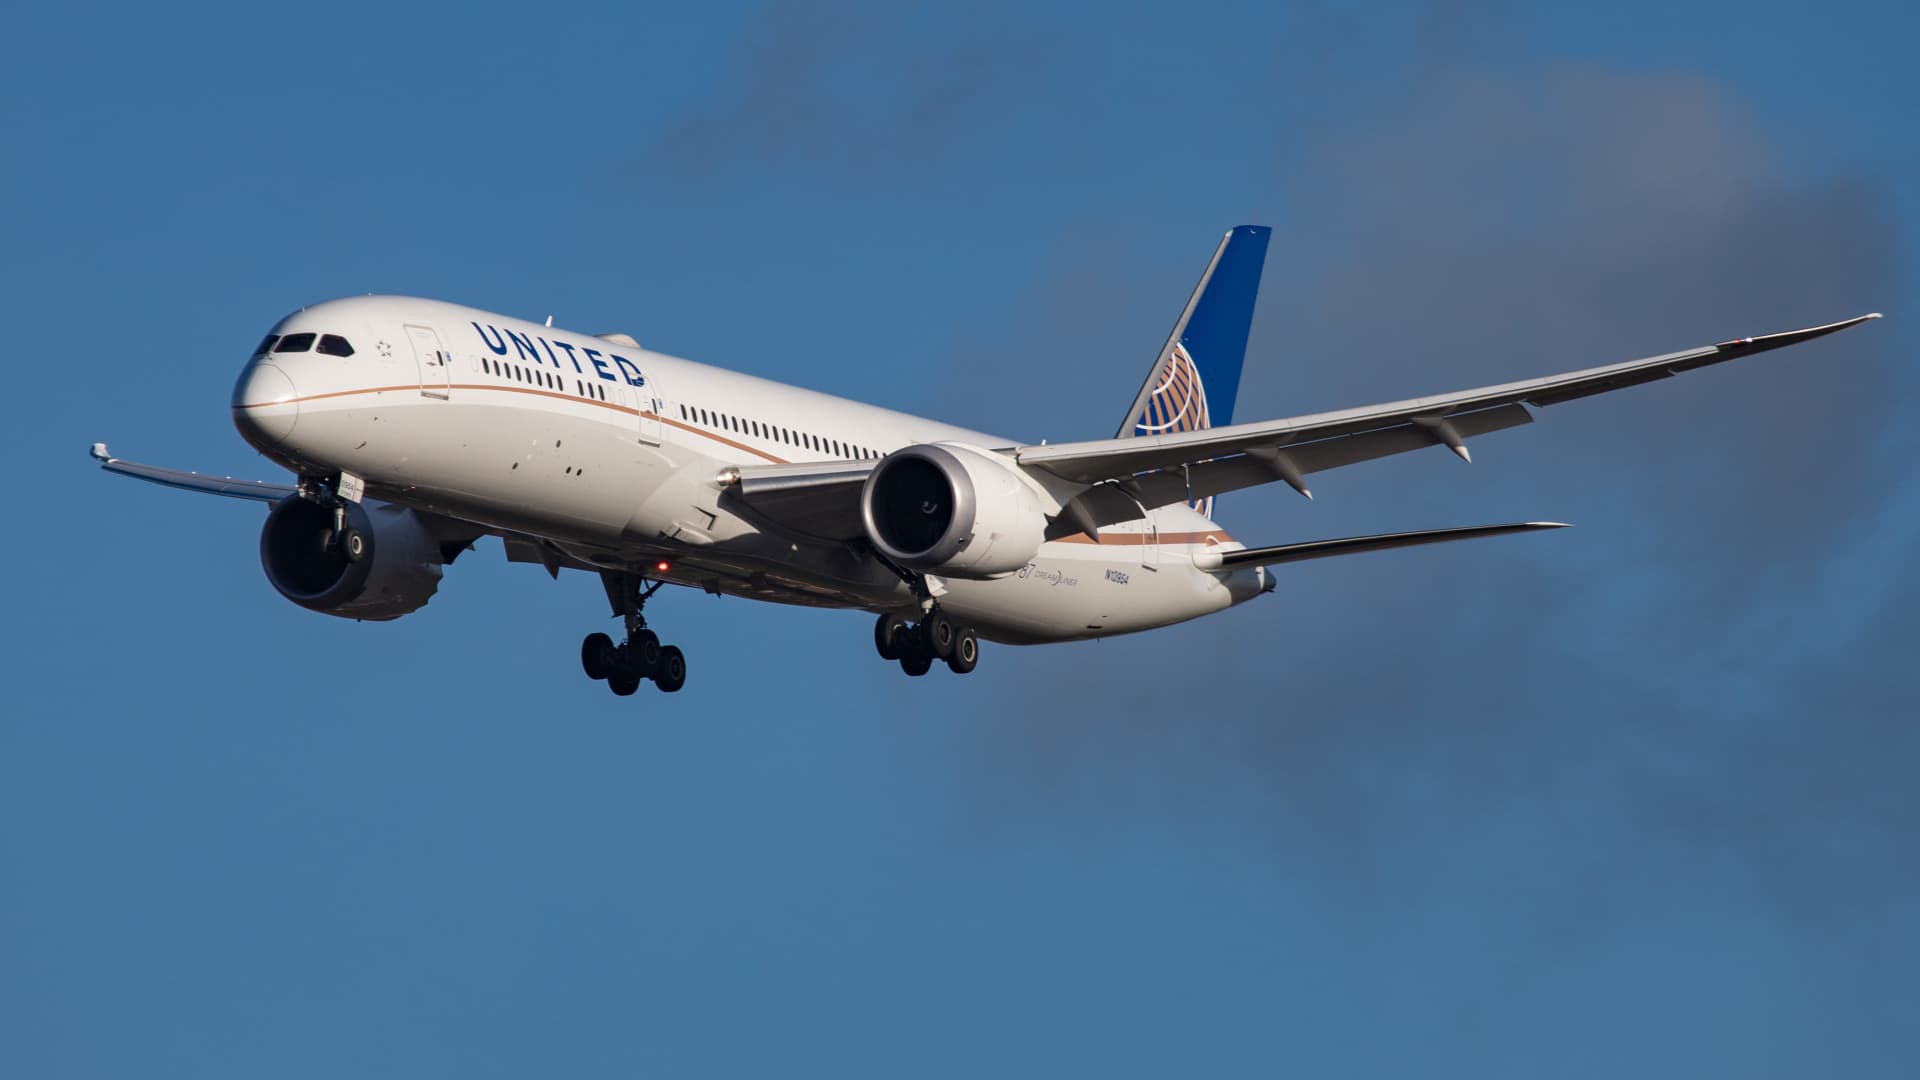 United CEO says business travel has ‘plateaued’ but revenue is still rising